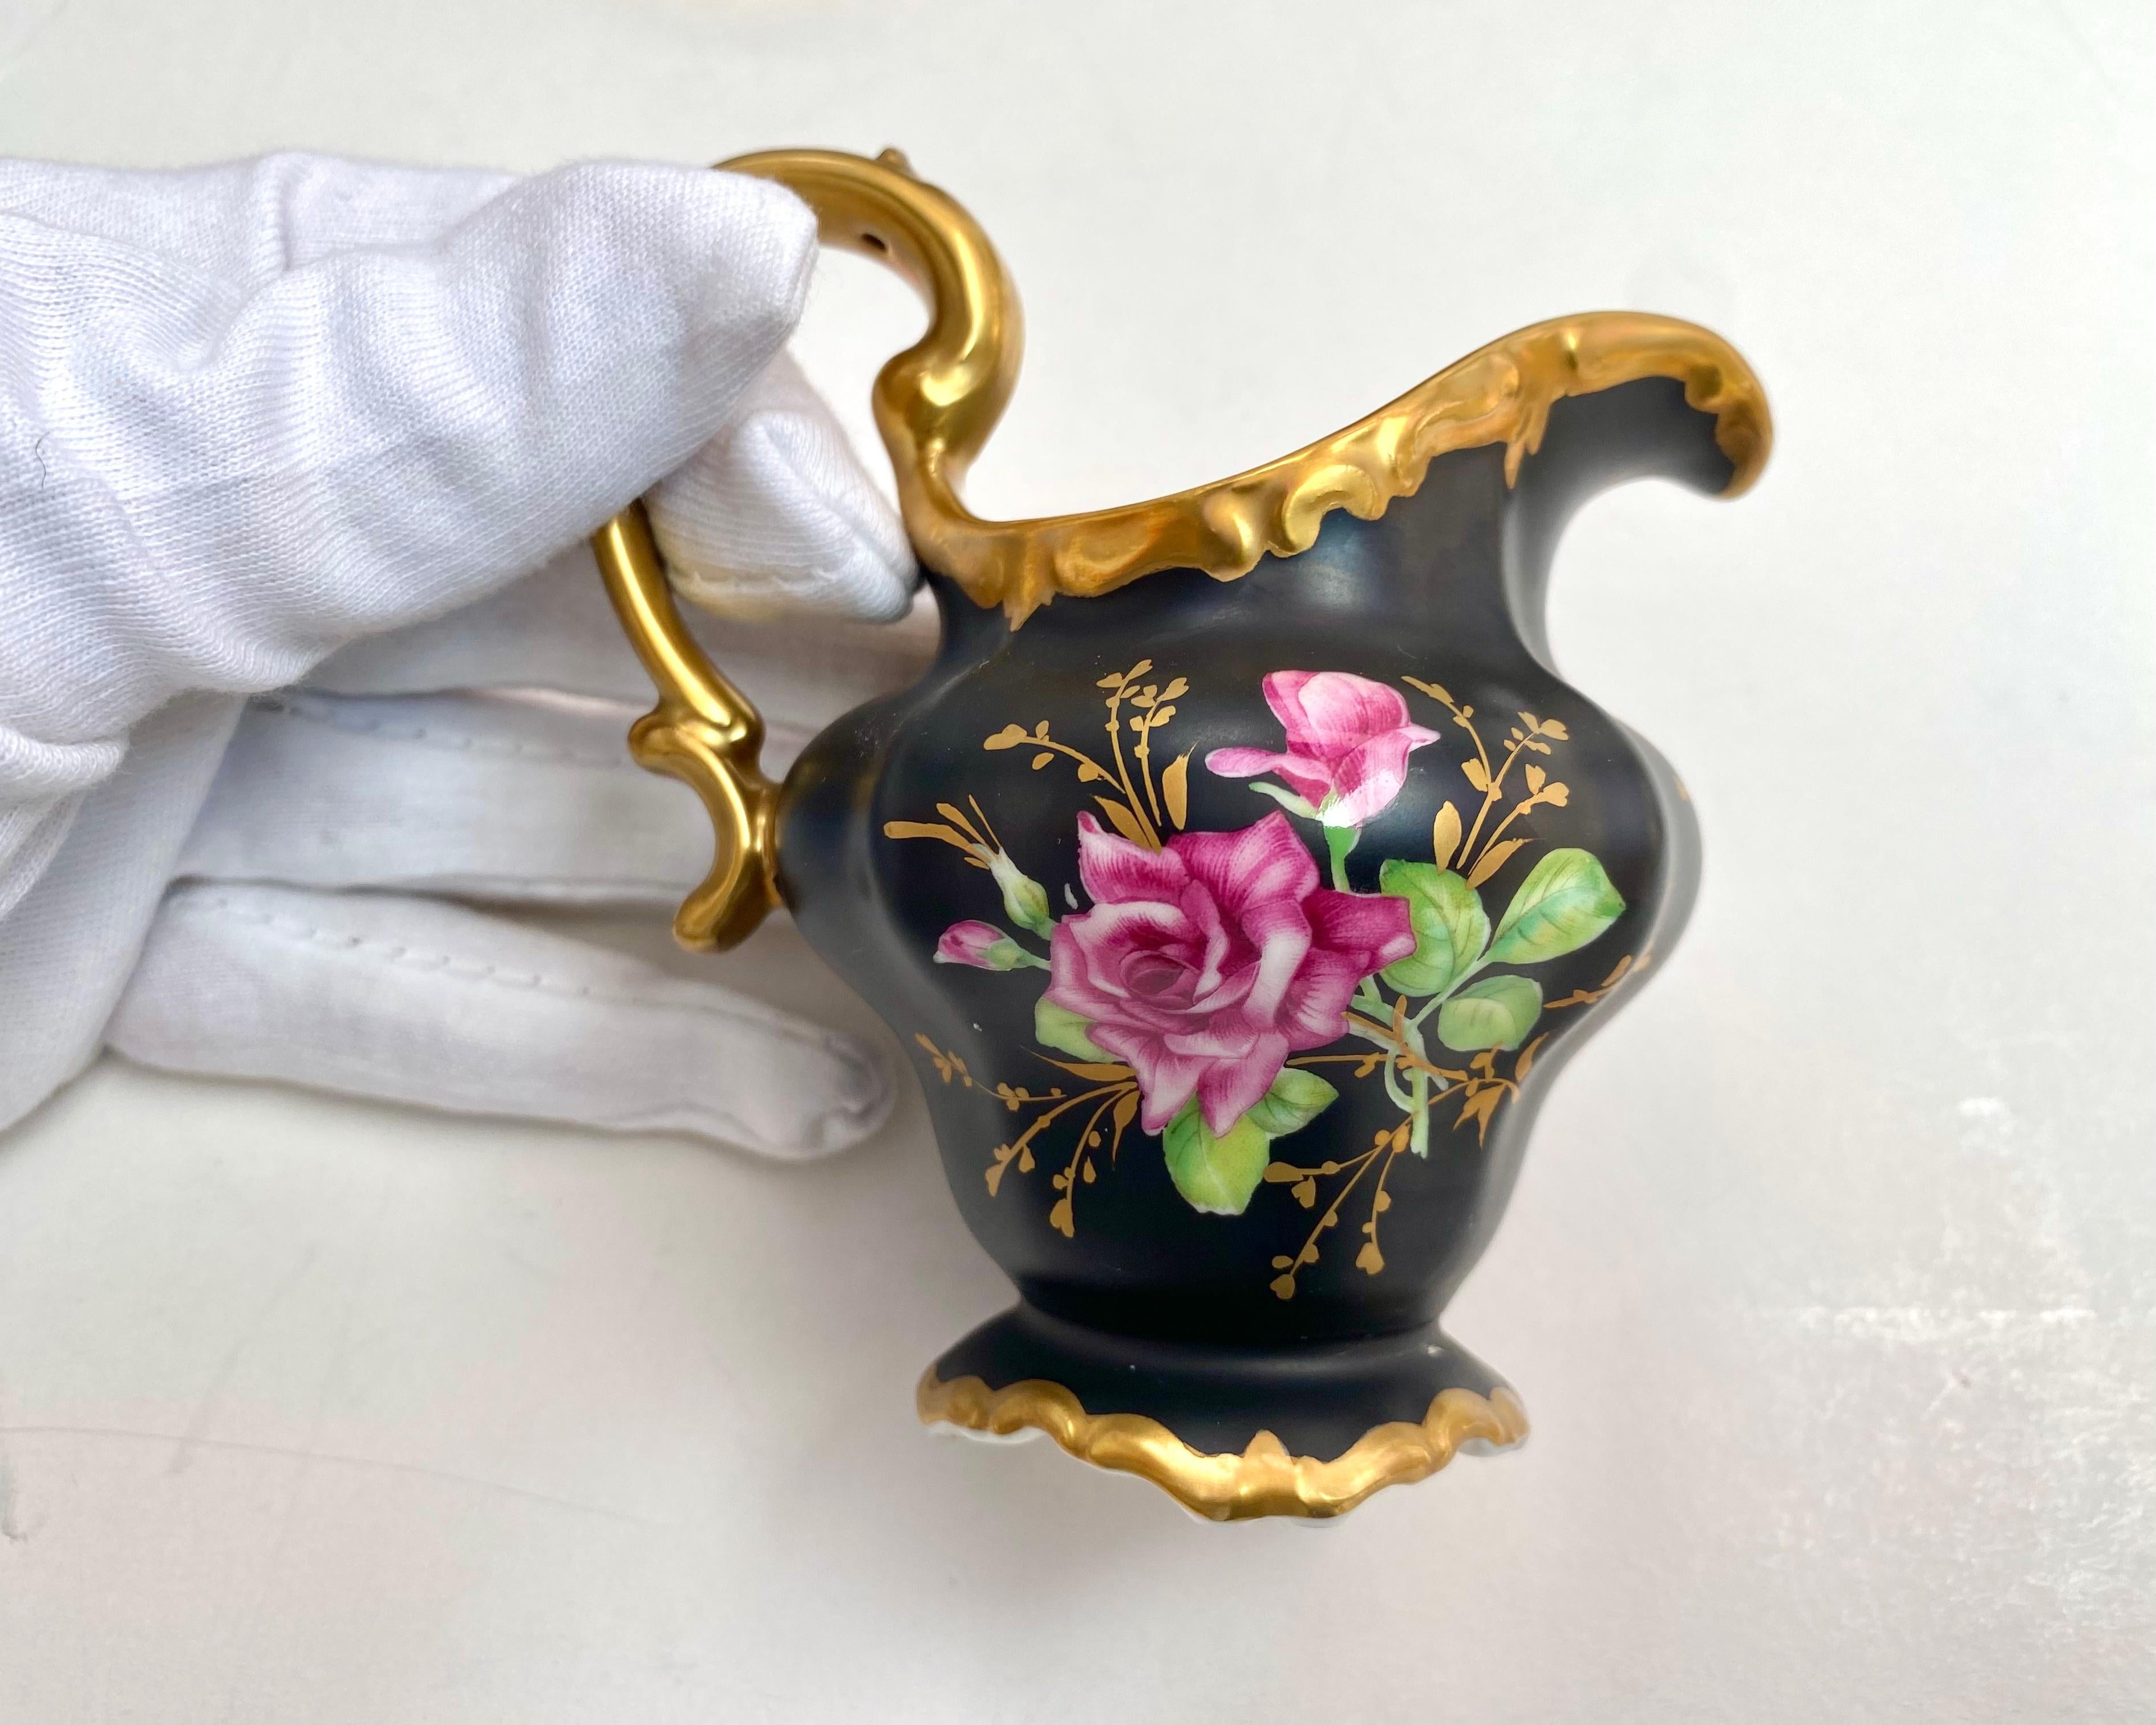 Vintage porcelain coffee set for 2 persons, Tet-A-Tet, 9 items. Pink roses on black background. Gilding. 

From the famous manufactory Rosenthal Selb Germany, 1950s.

In addition to cups and saucers, the set includes a sugar bowl, a teapot and a